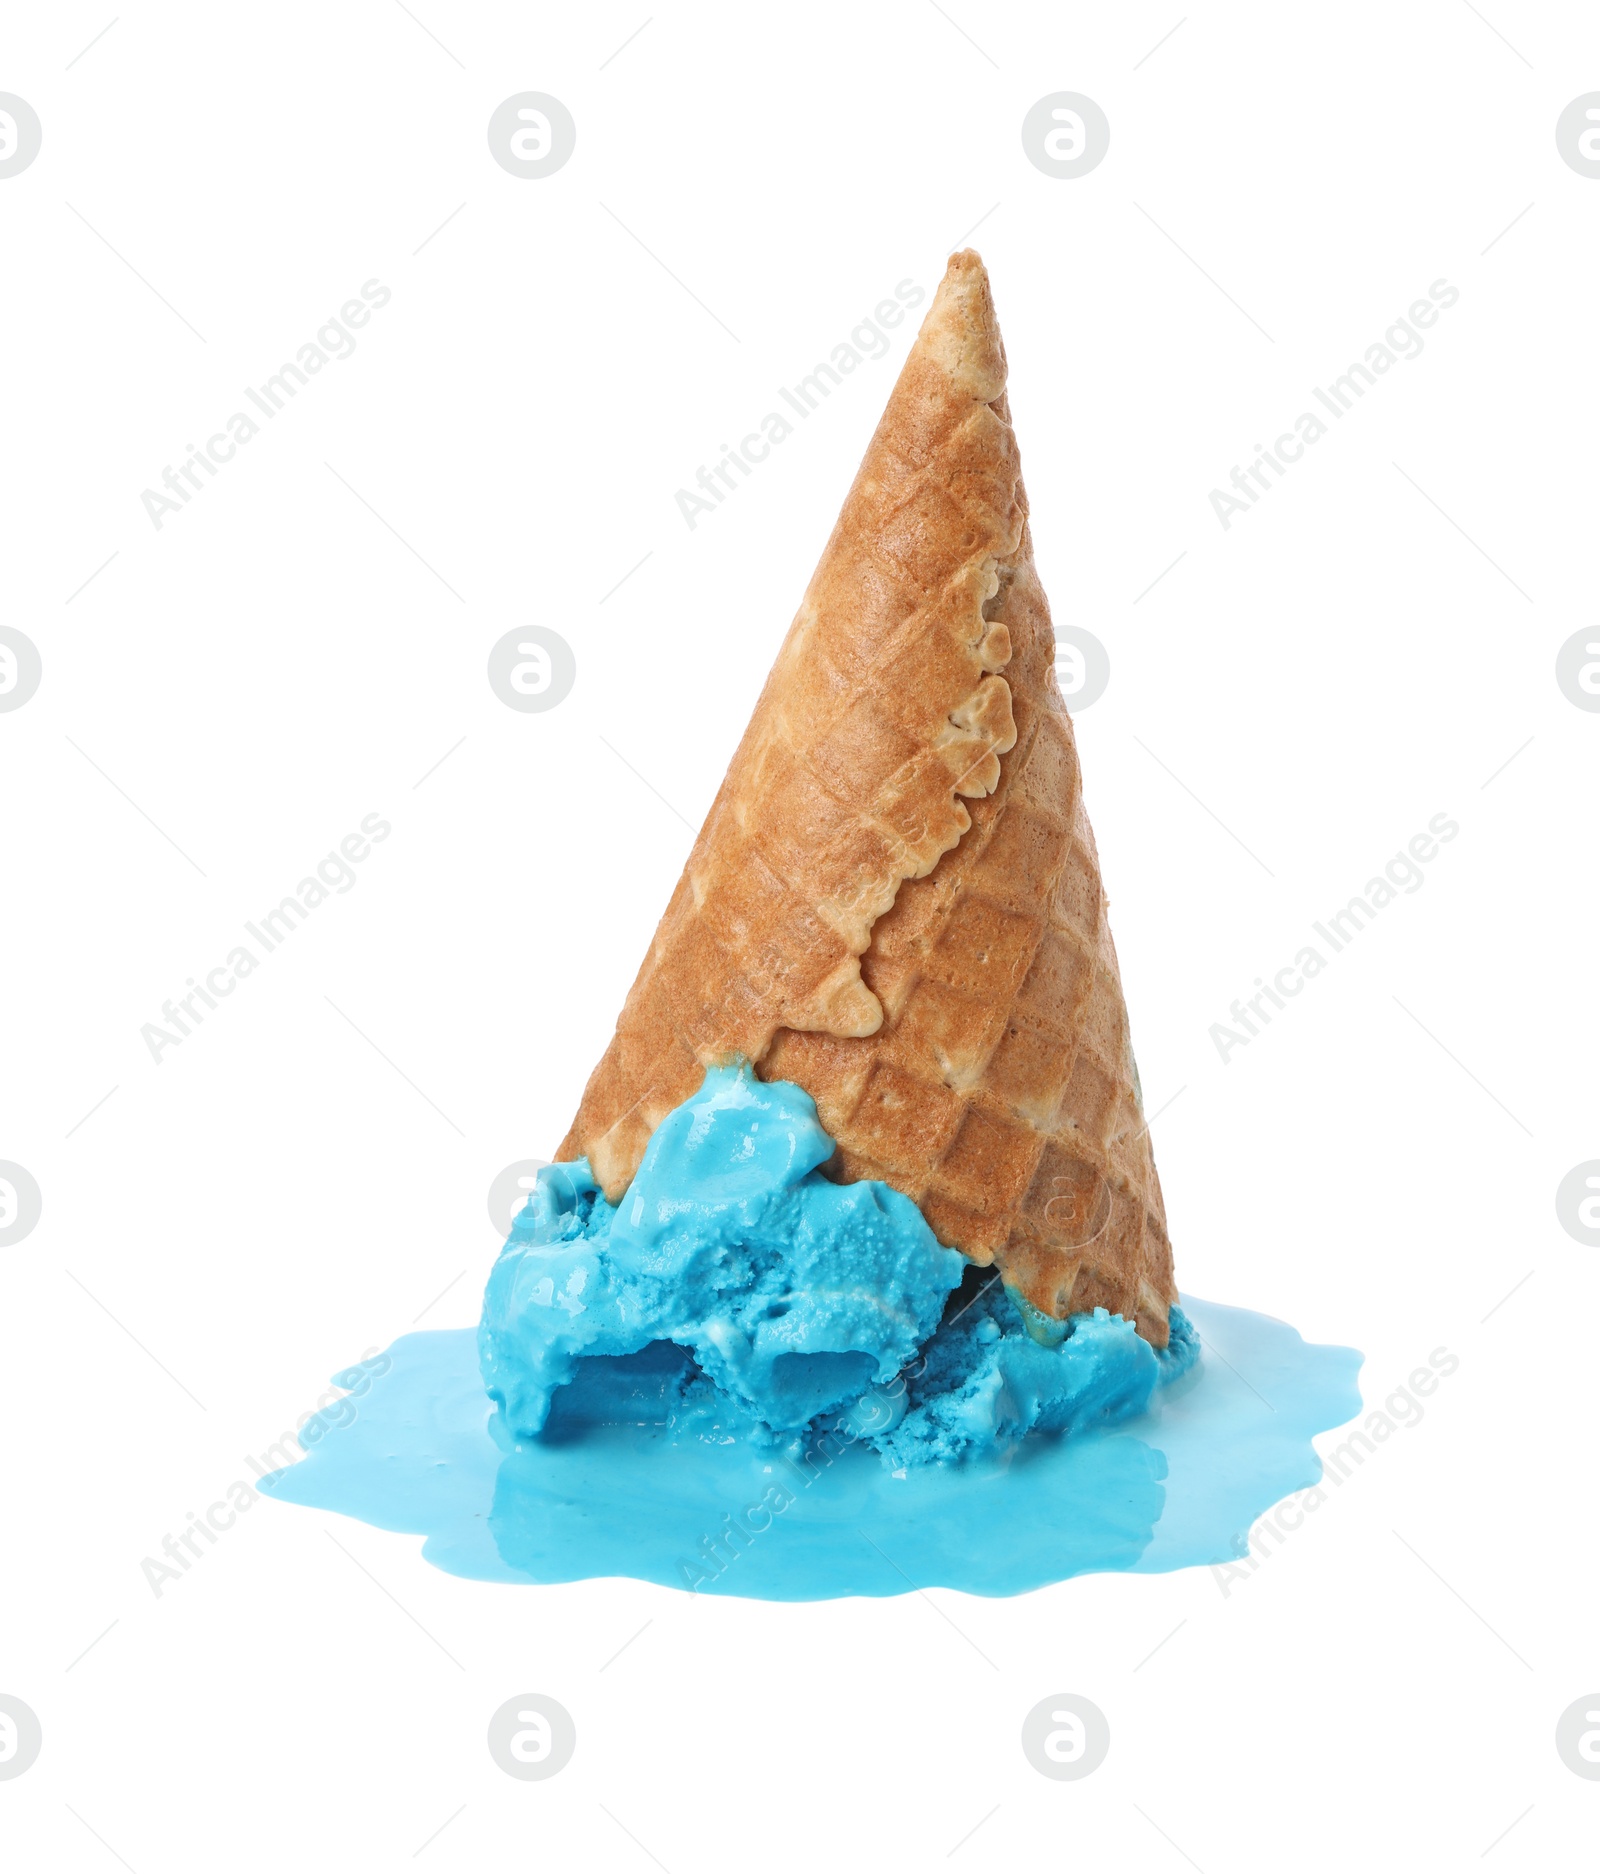 Photo of Melting ice cream in wafer cone isolated on white